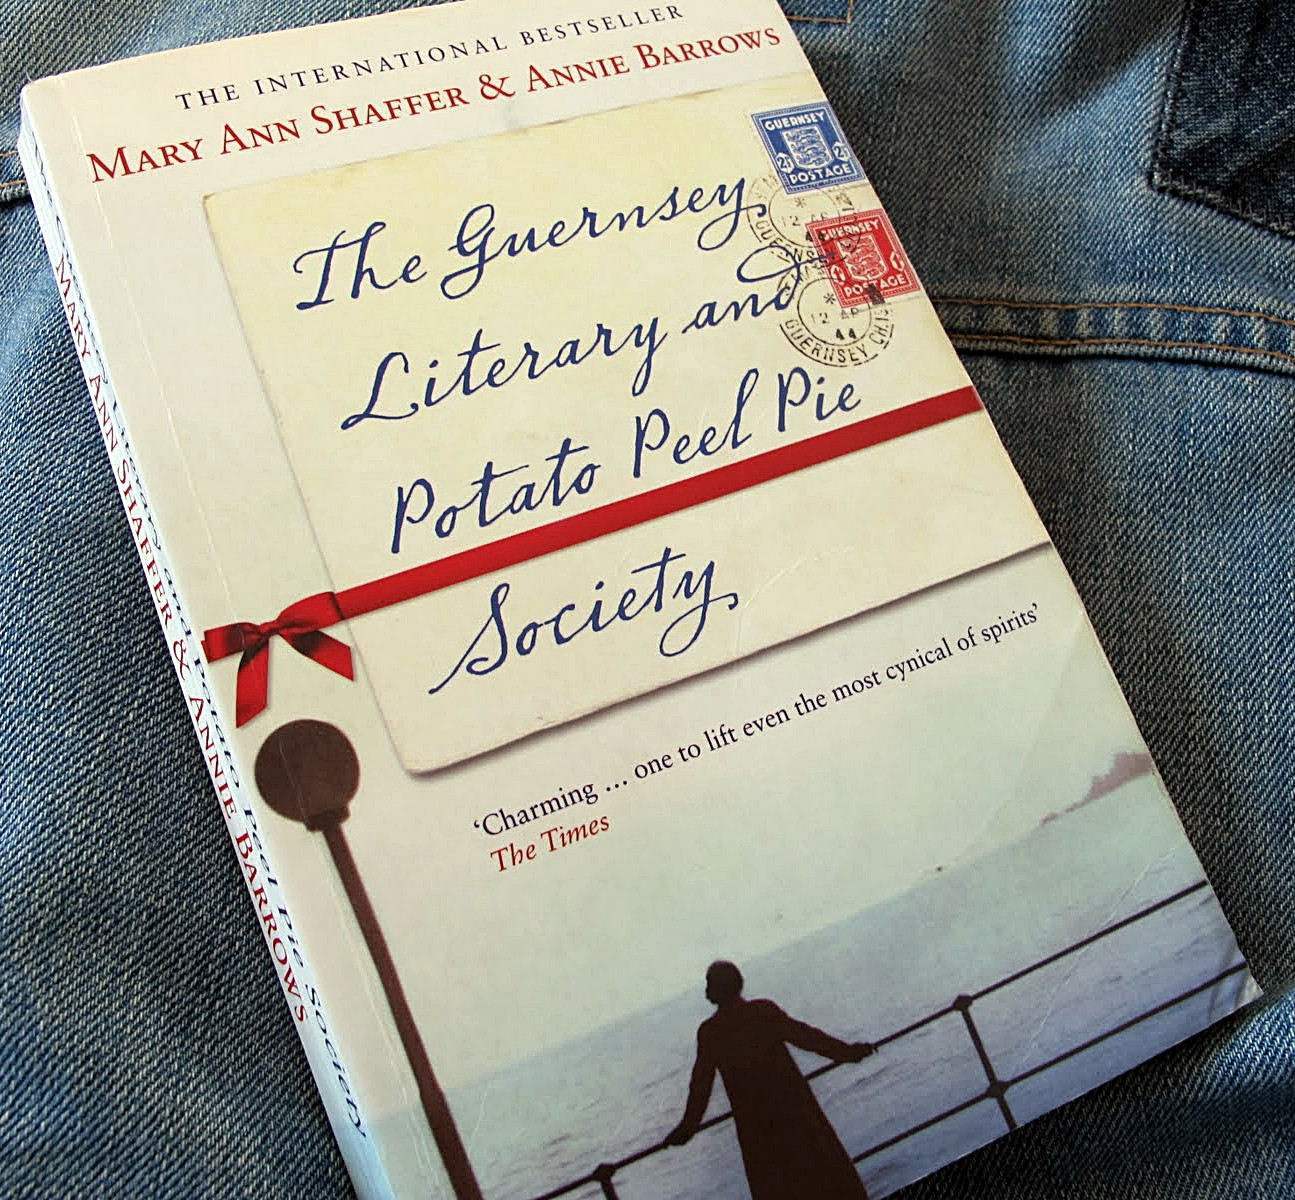 Guernsey And Potato Peel Society
 Mail Adventures The Guernsey Literary and Potato Peel Pie